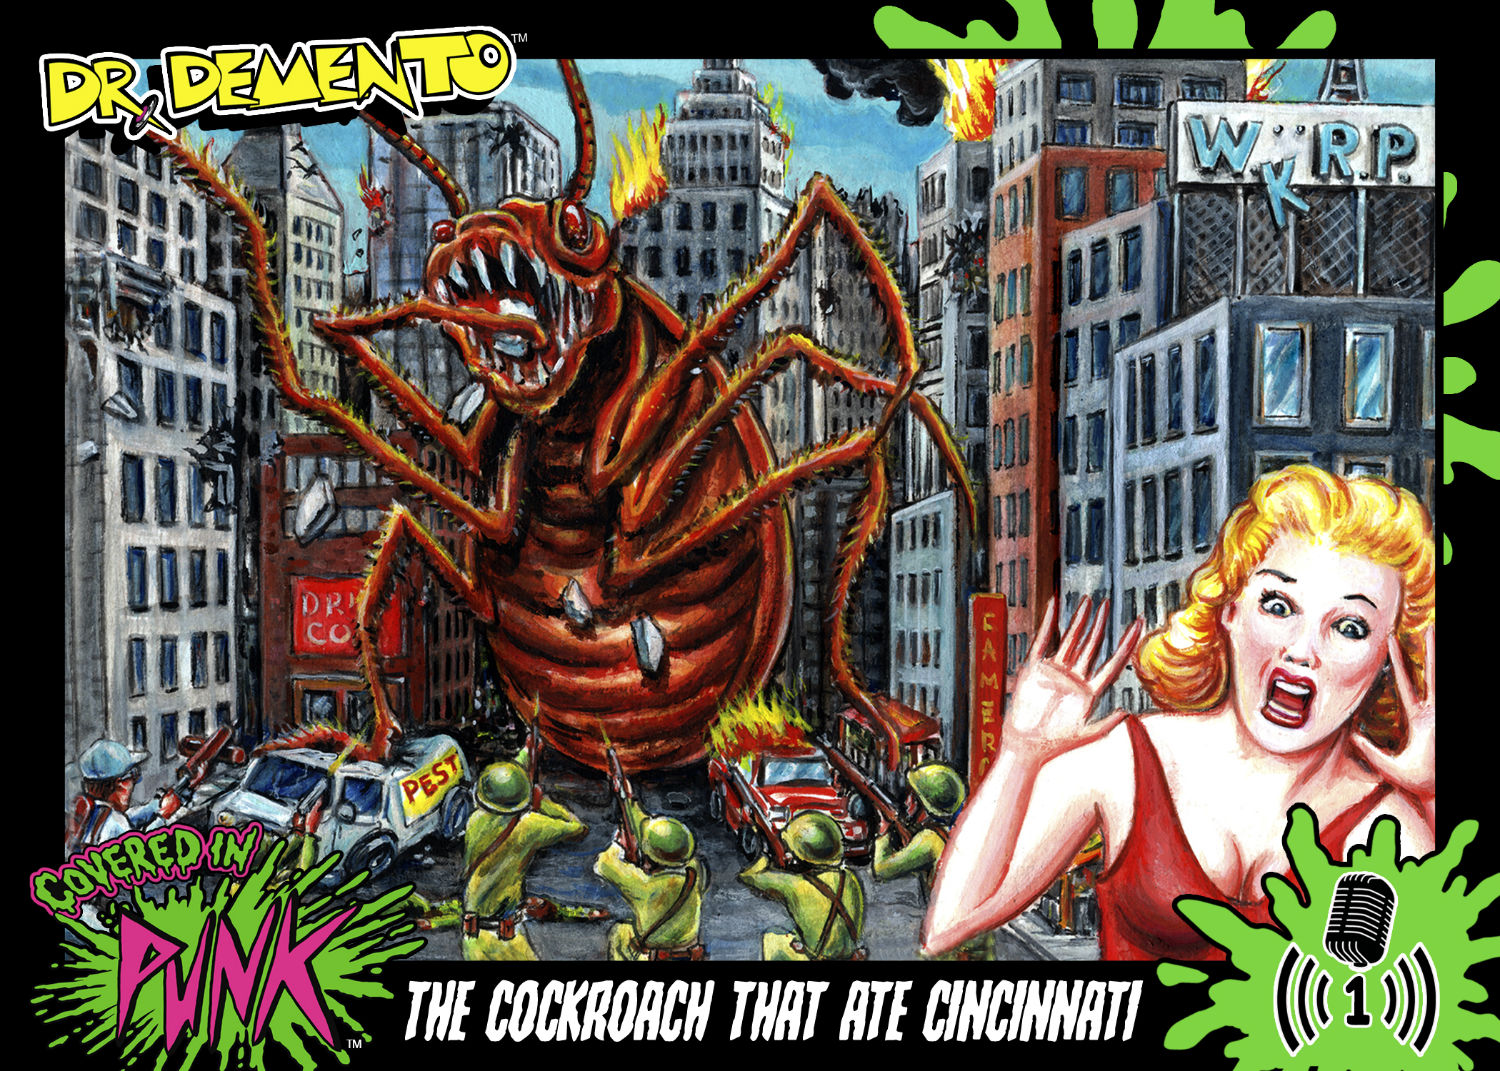 “The Cockroach that Ate Cincinnati” artwork by Neil Camera. © 2018 Caf Muzeck, LLC. All Rights Reserved